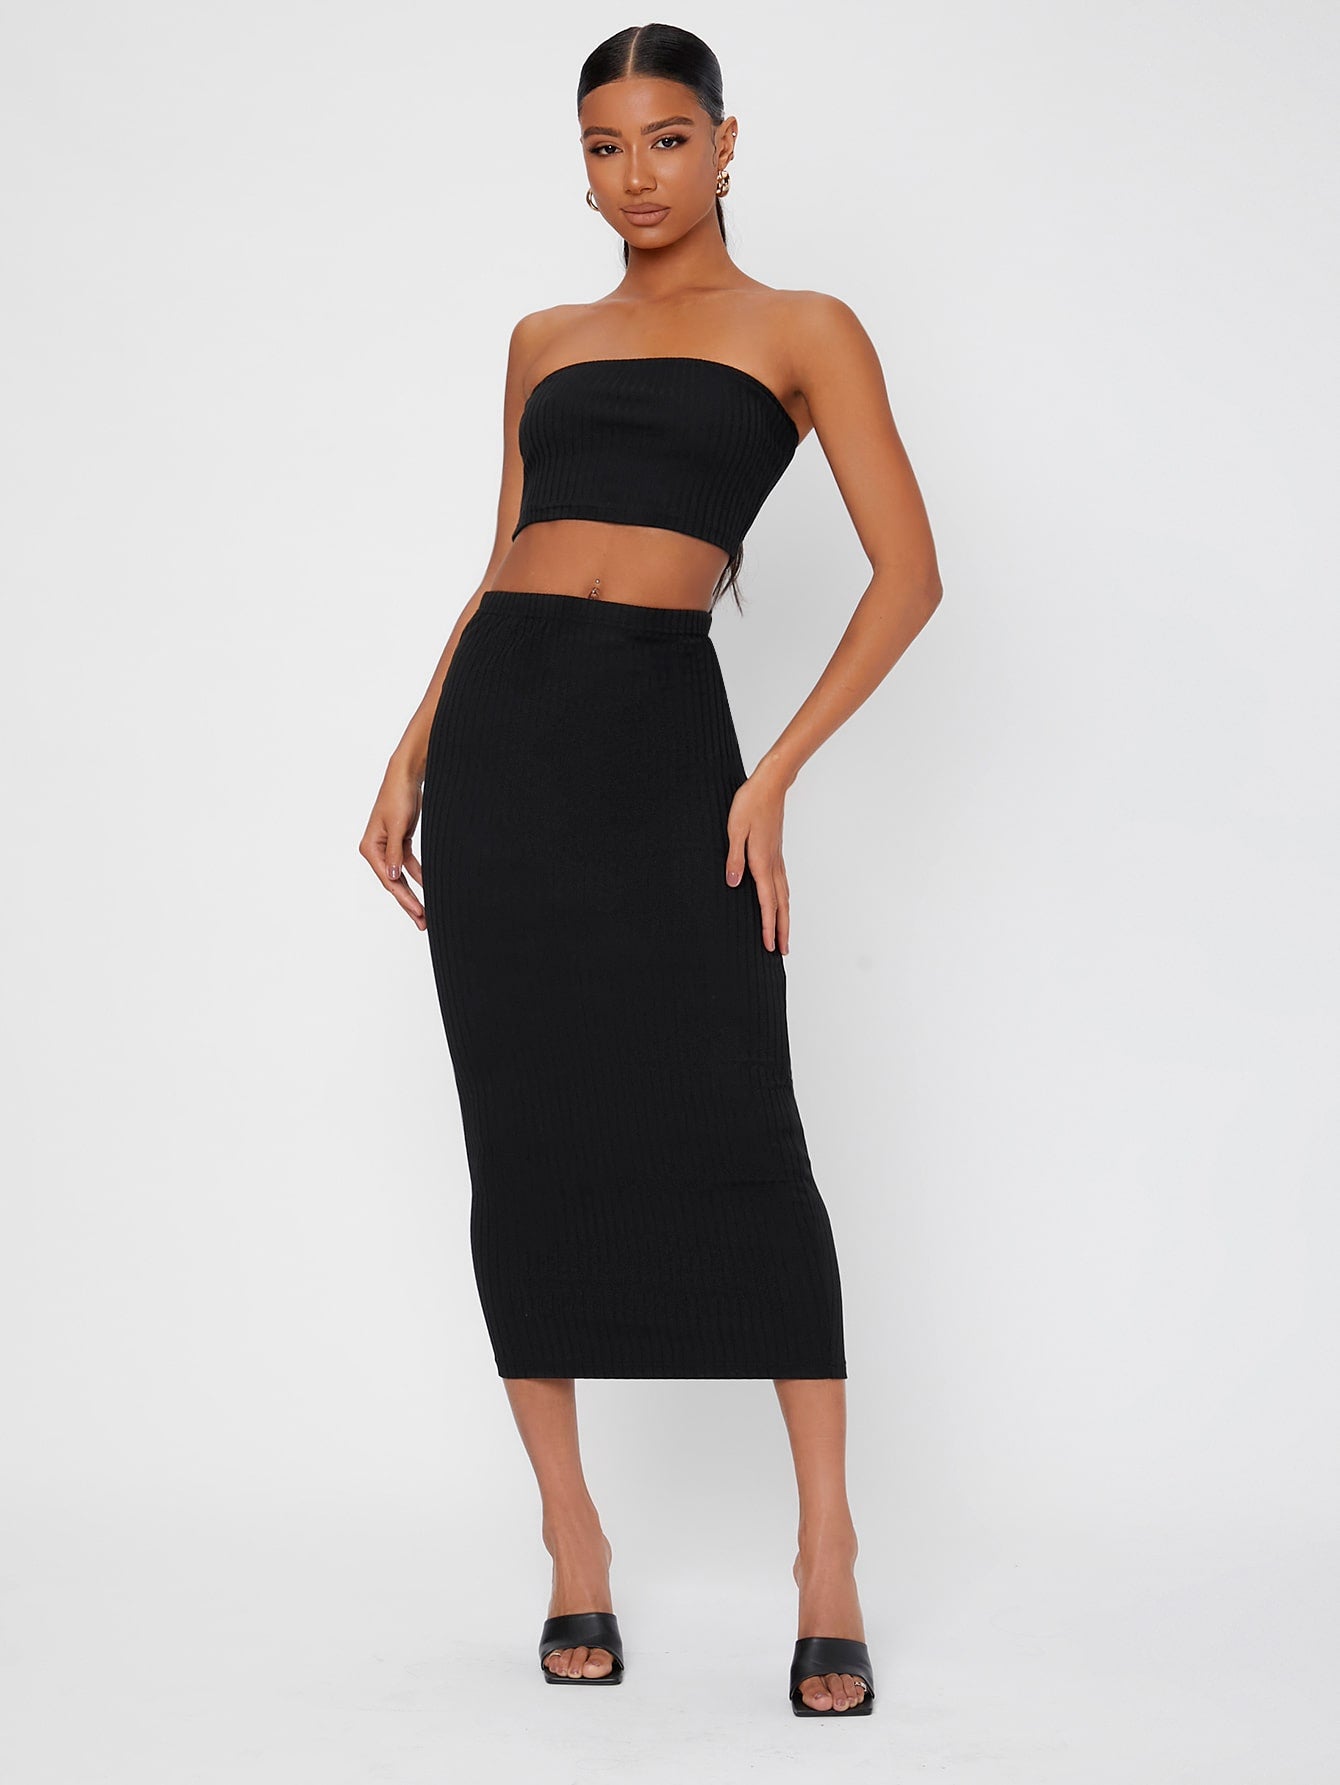 Women Two-piece Outfits Suppliers